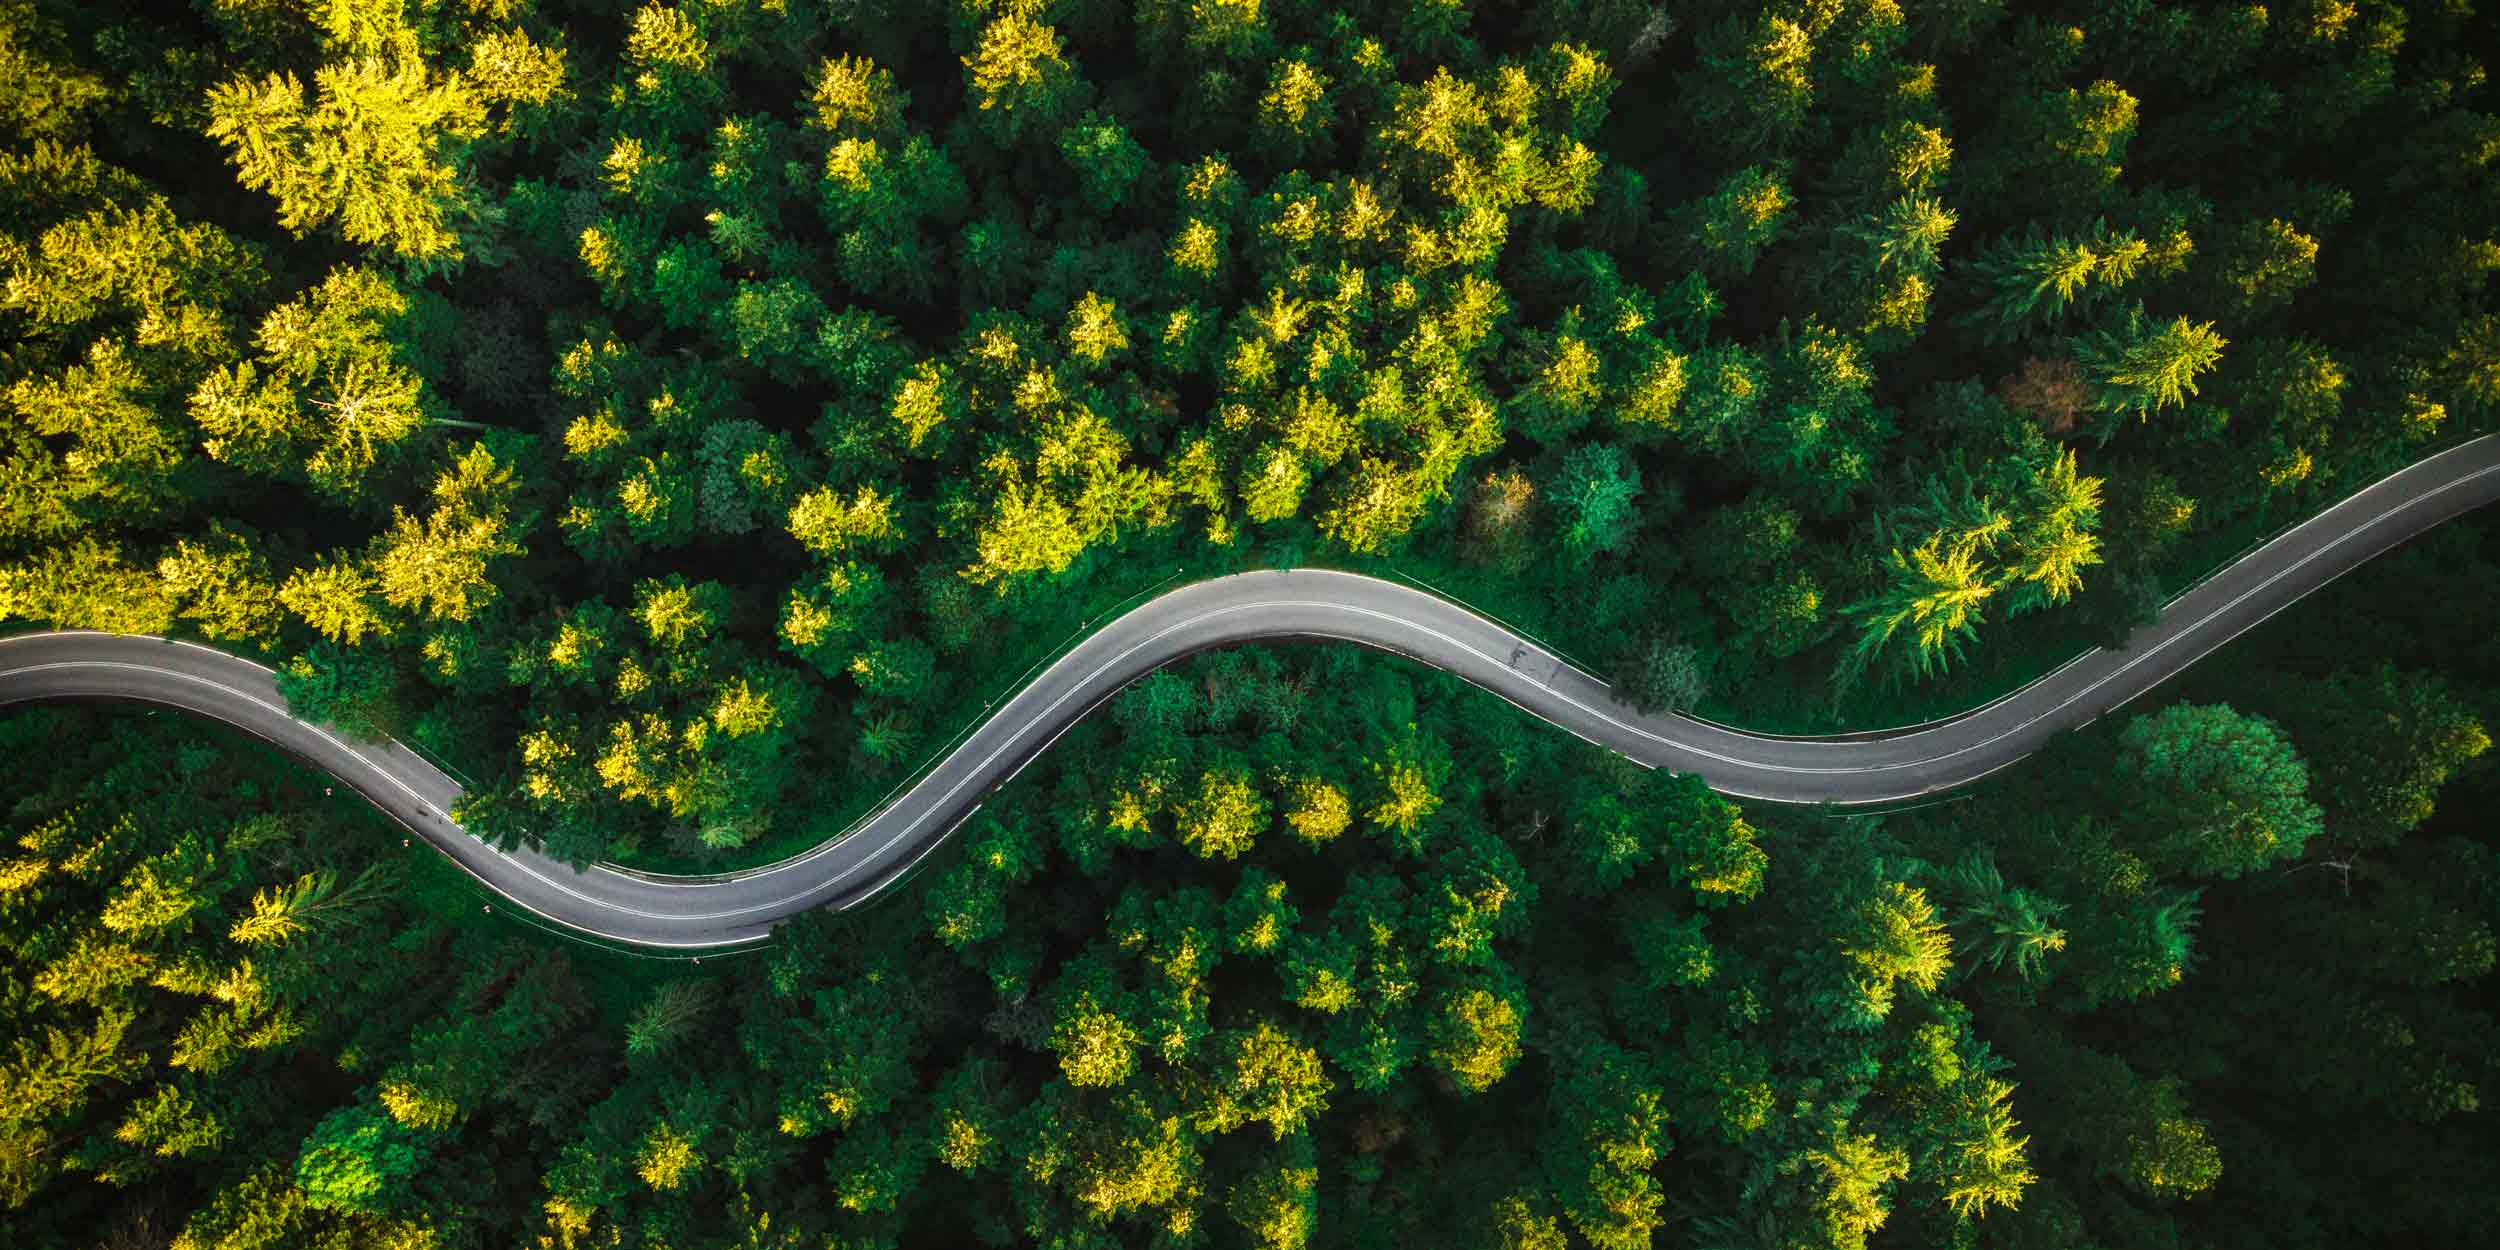 Curvy Road in Summer Pine Forest